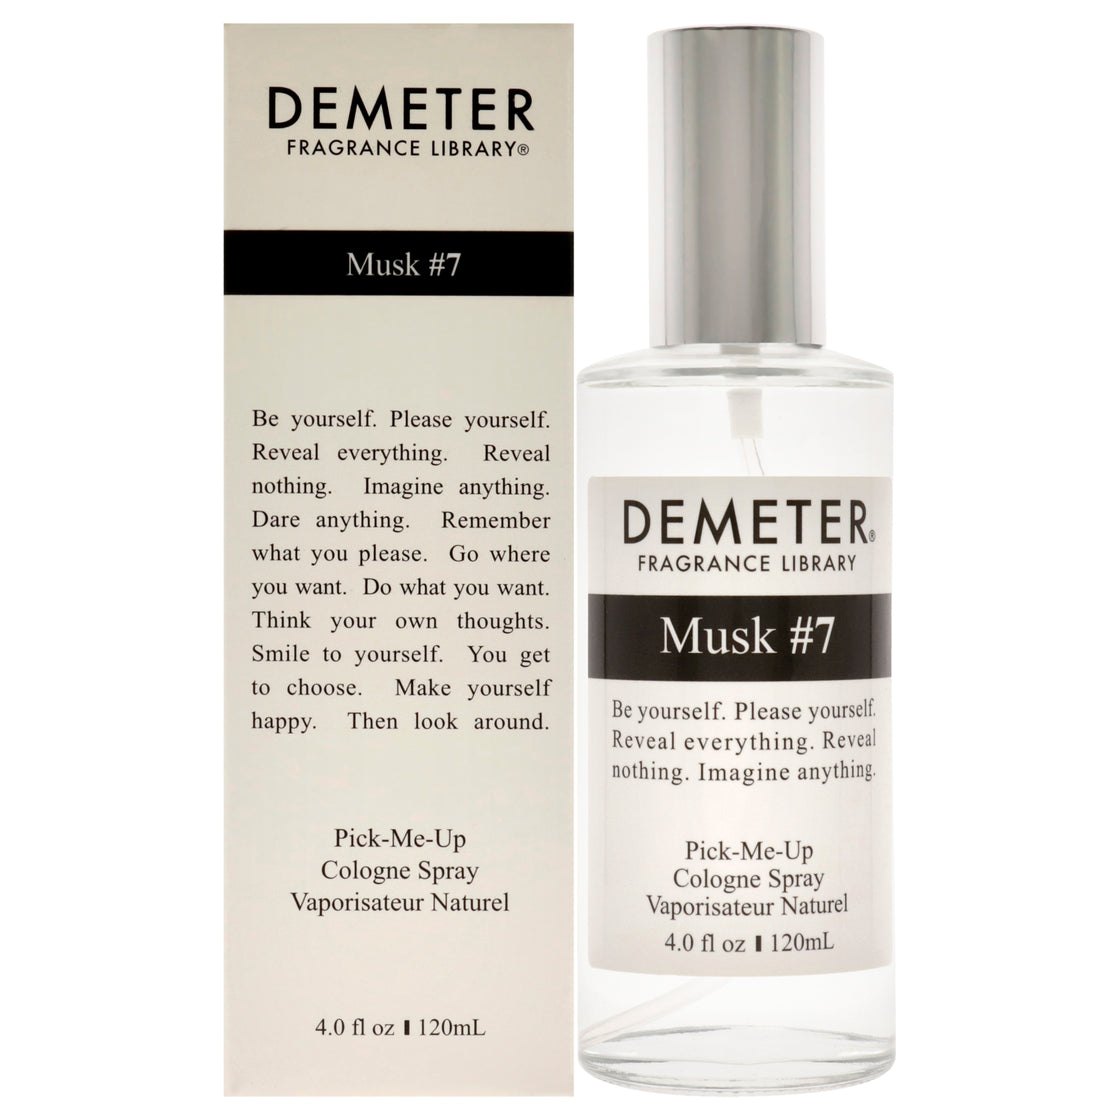 Musk #7 by Demeter for Women - 4 oz Cologne Spray